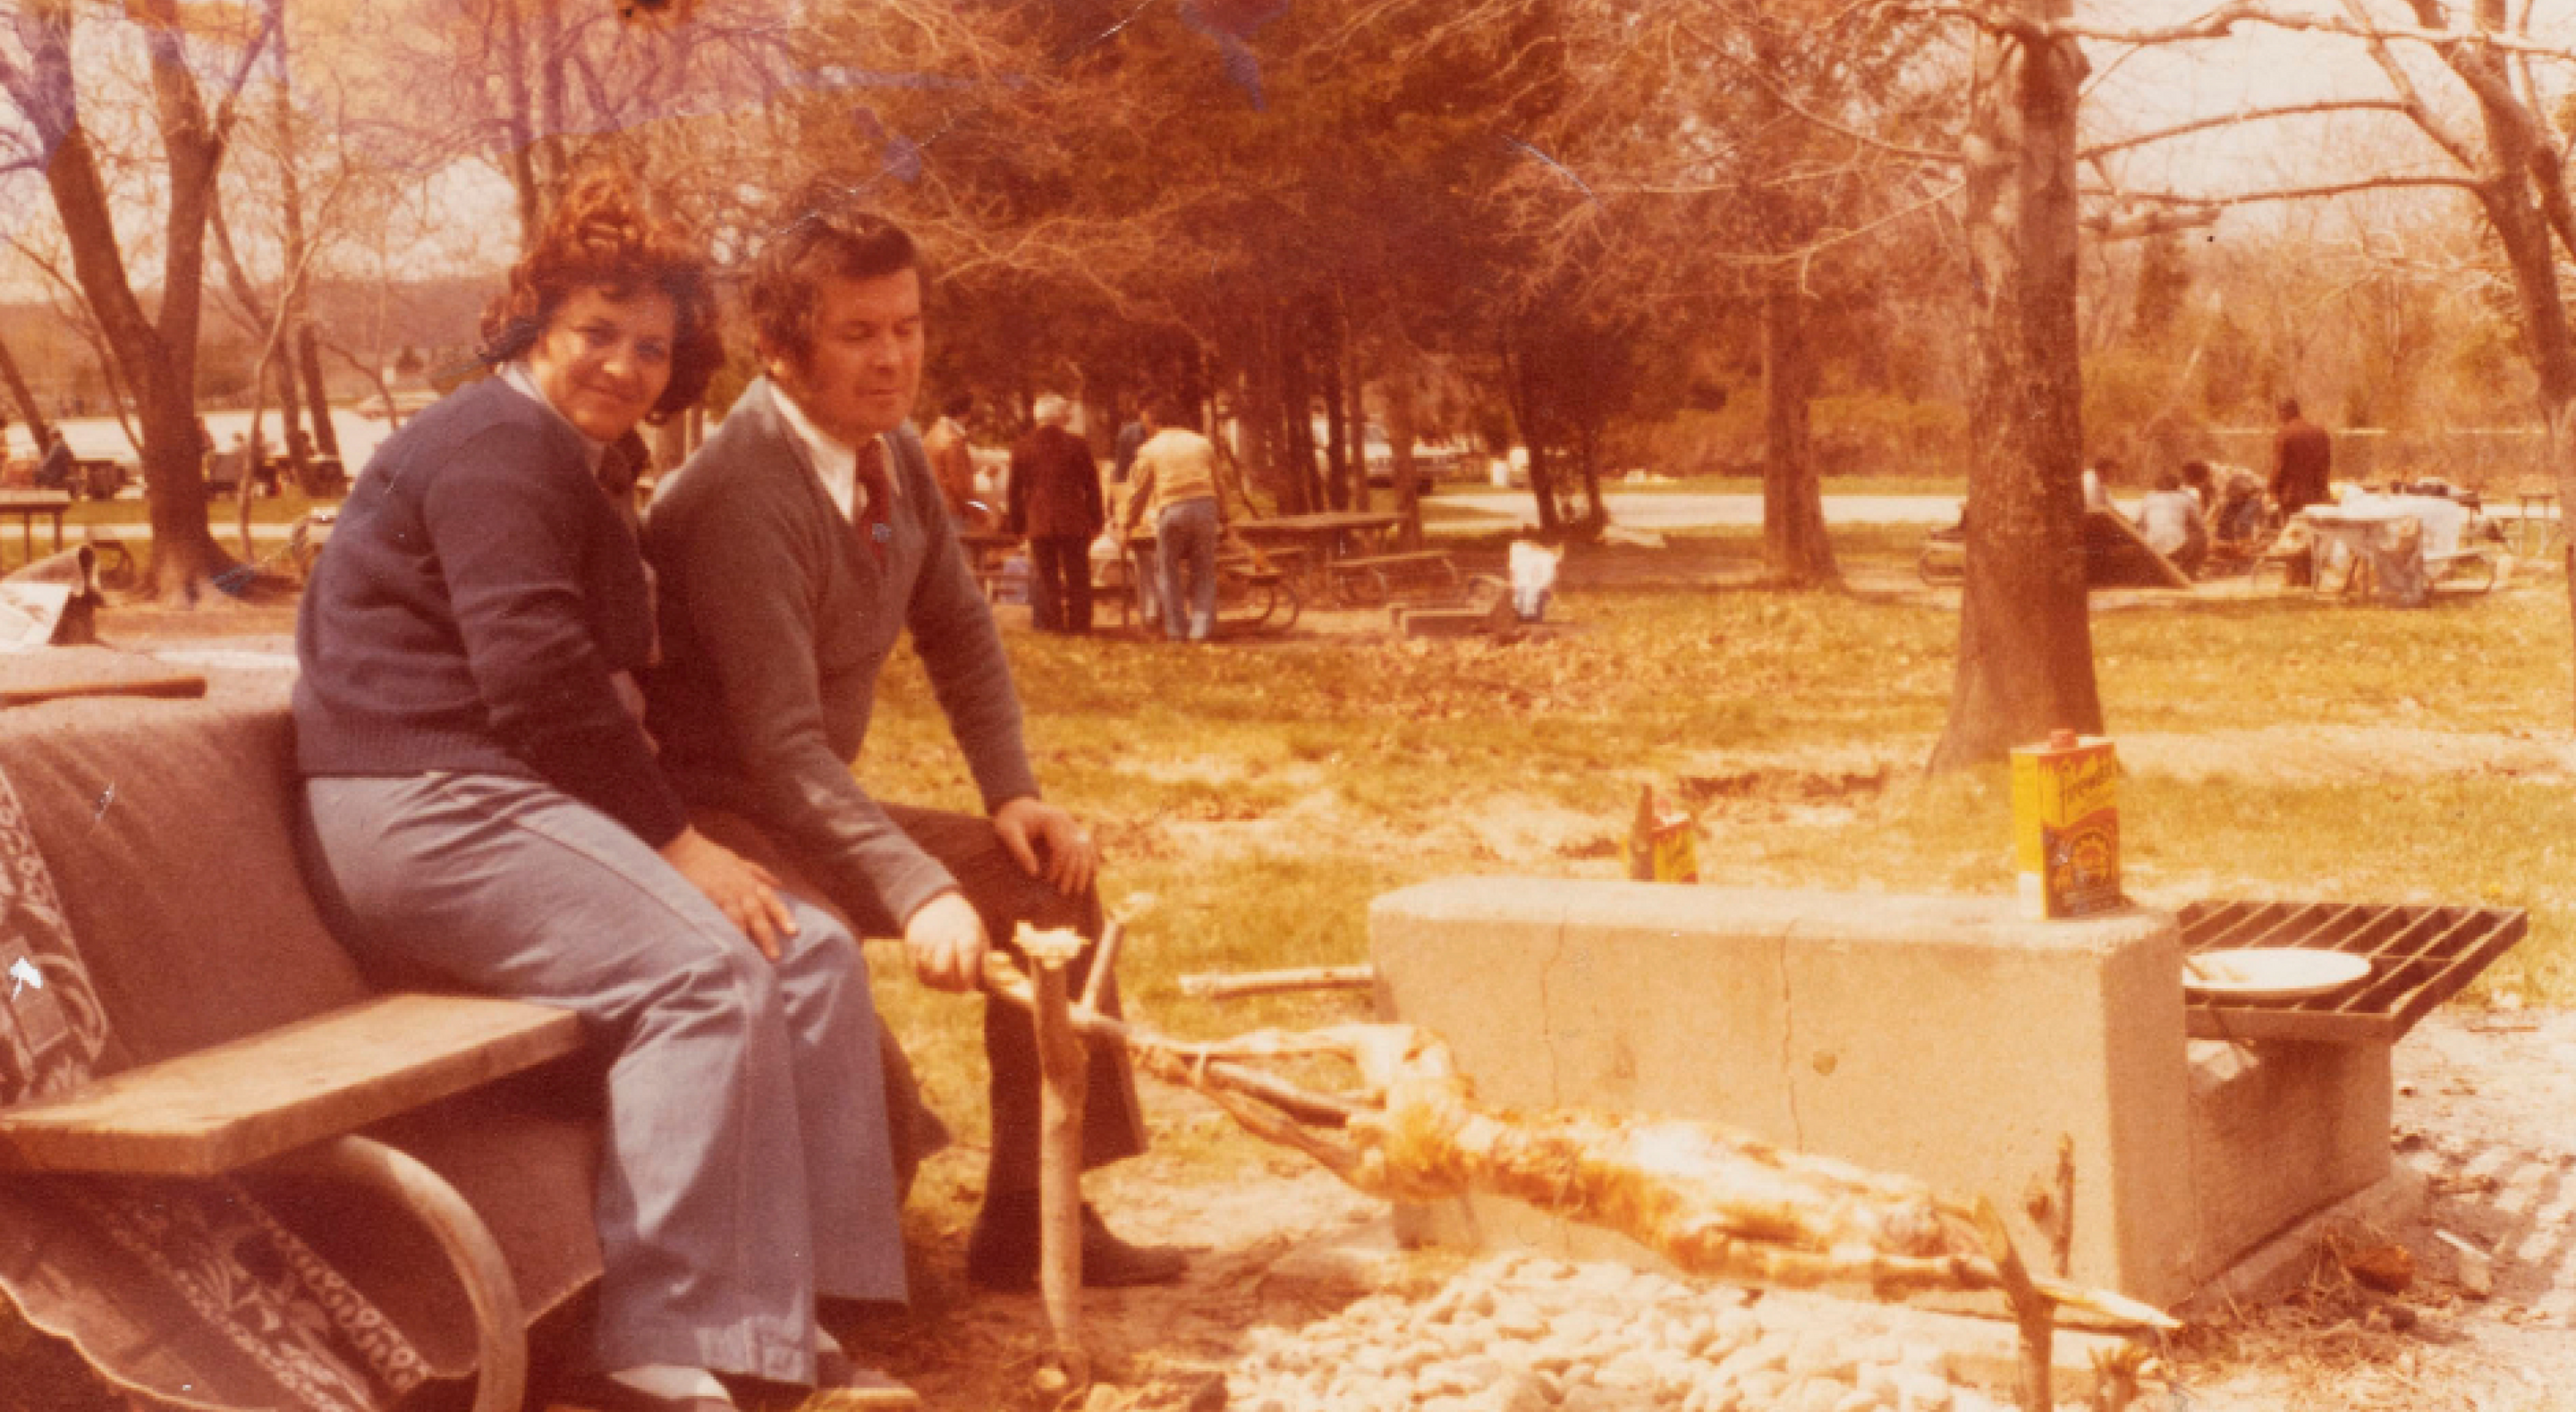 Couple posing for photo sitting on a park bench tending to a barbecue pit 